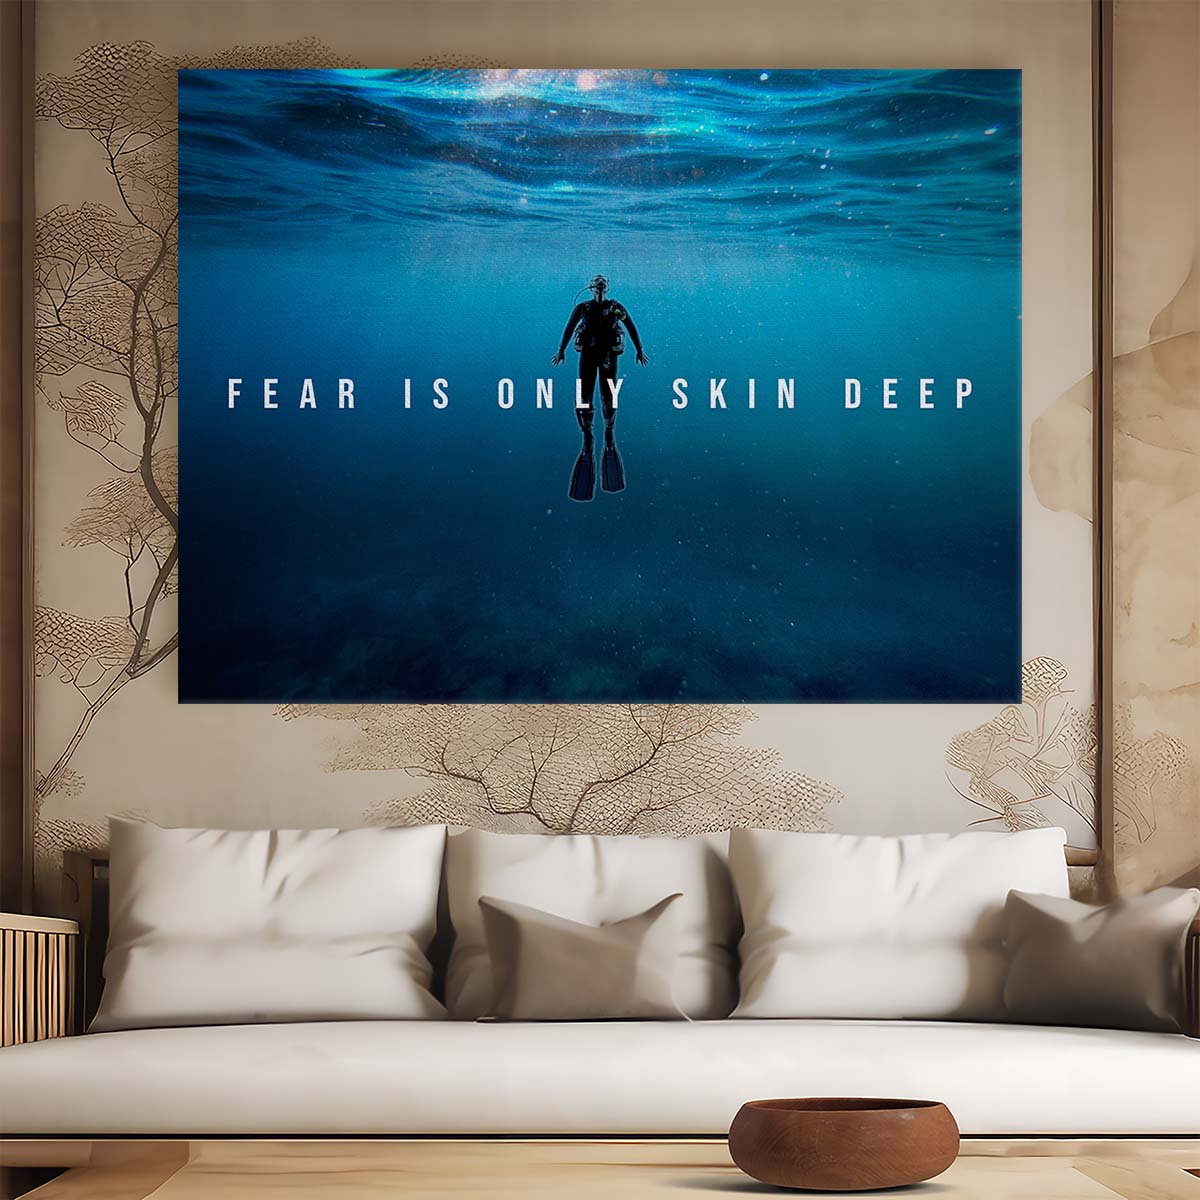 Fear Is Only Skin Deep Wall Art by Luxuriance Designs. Made in USA.